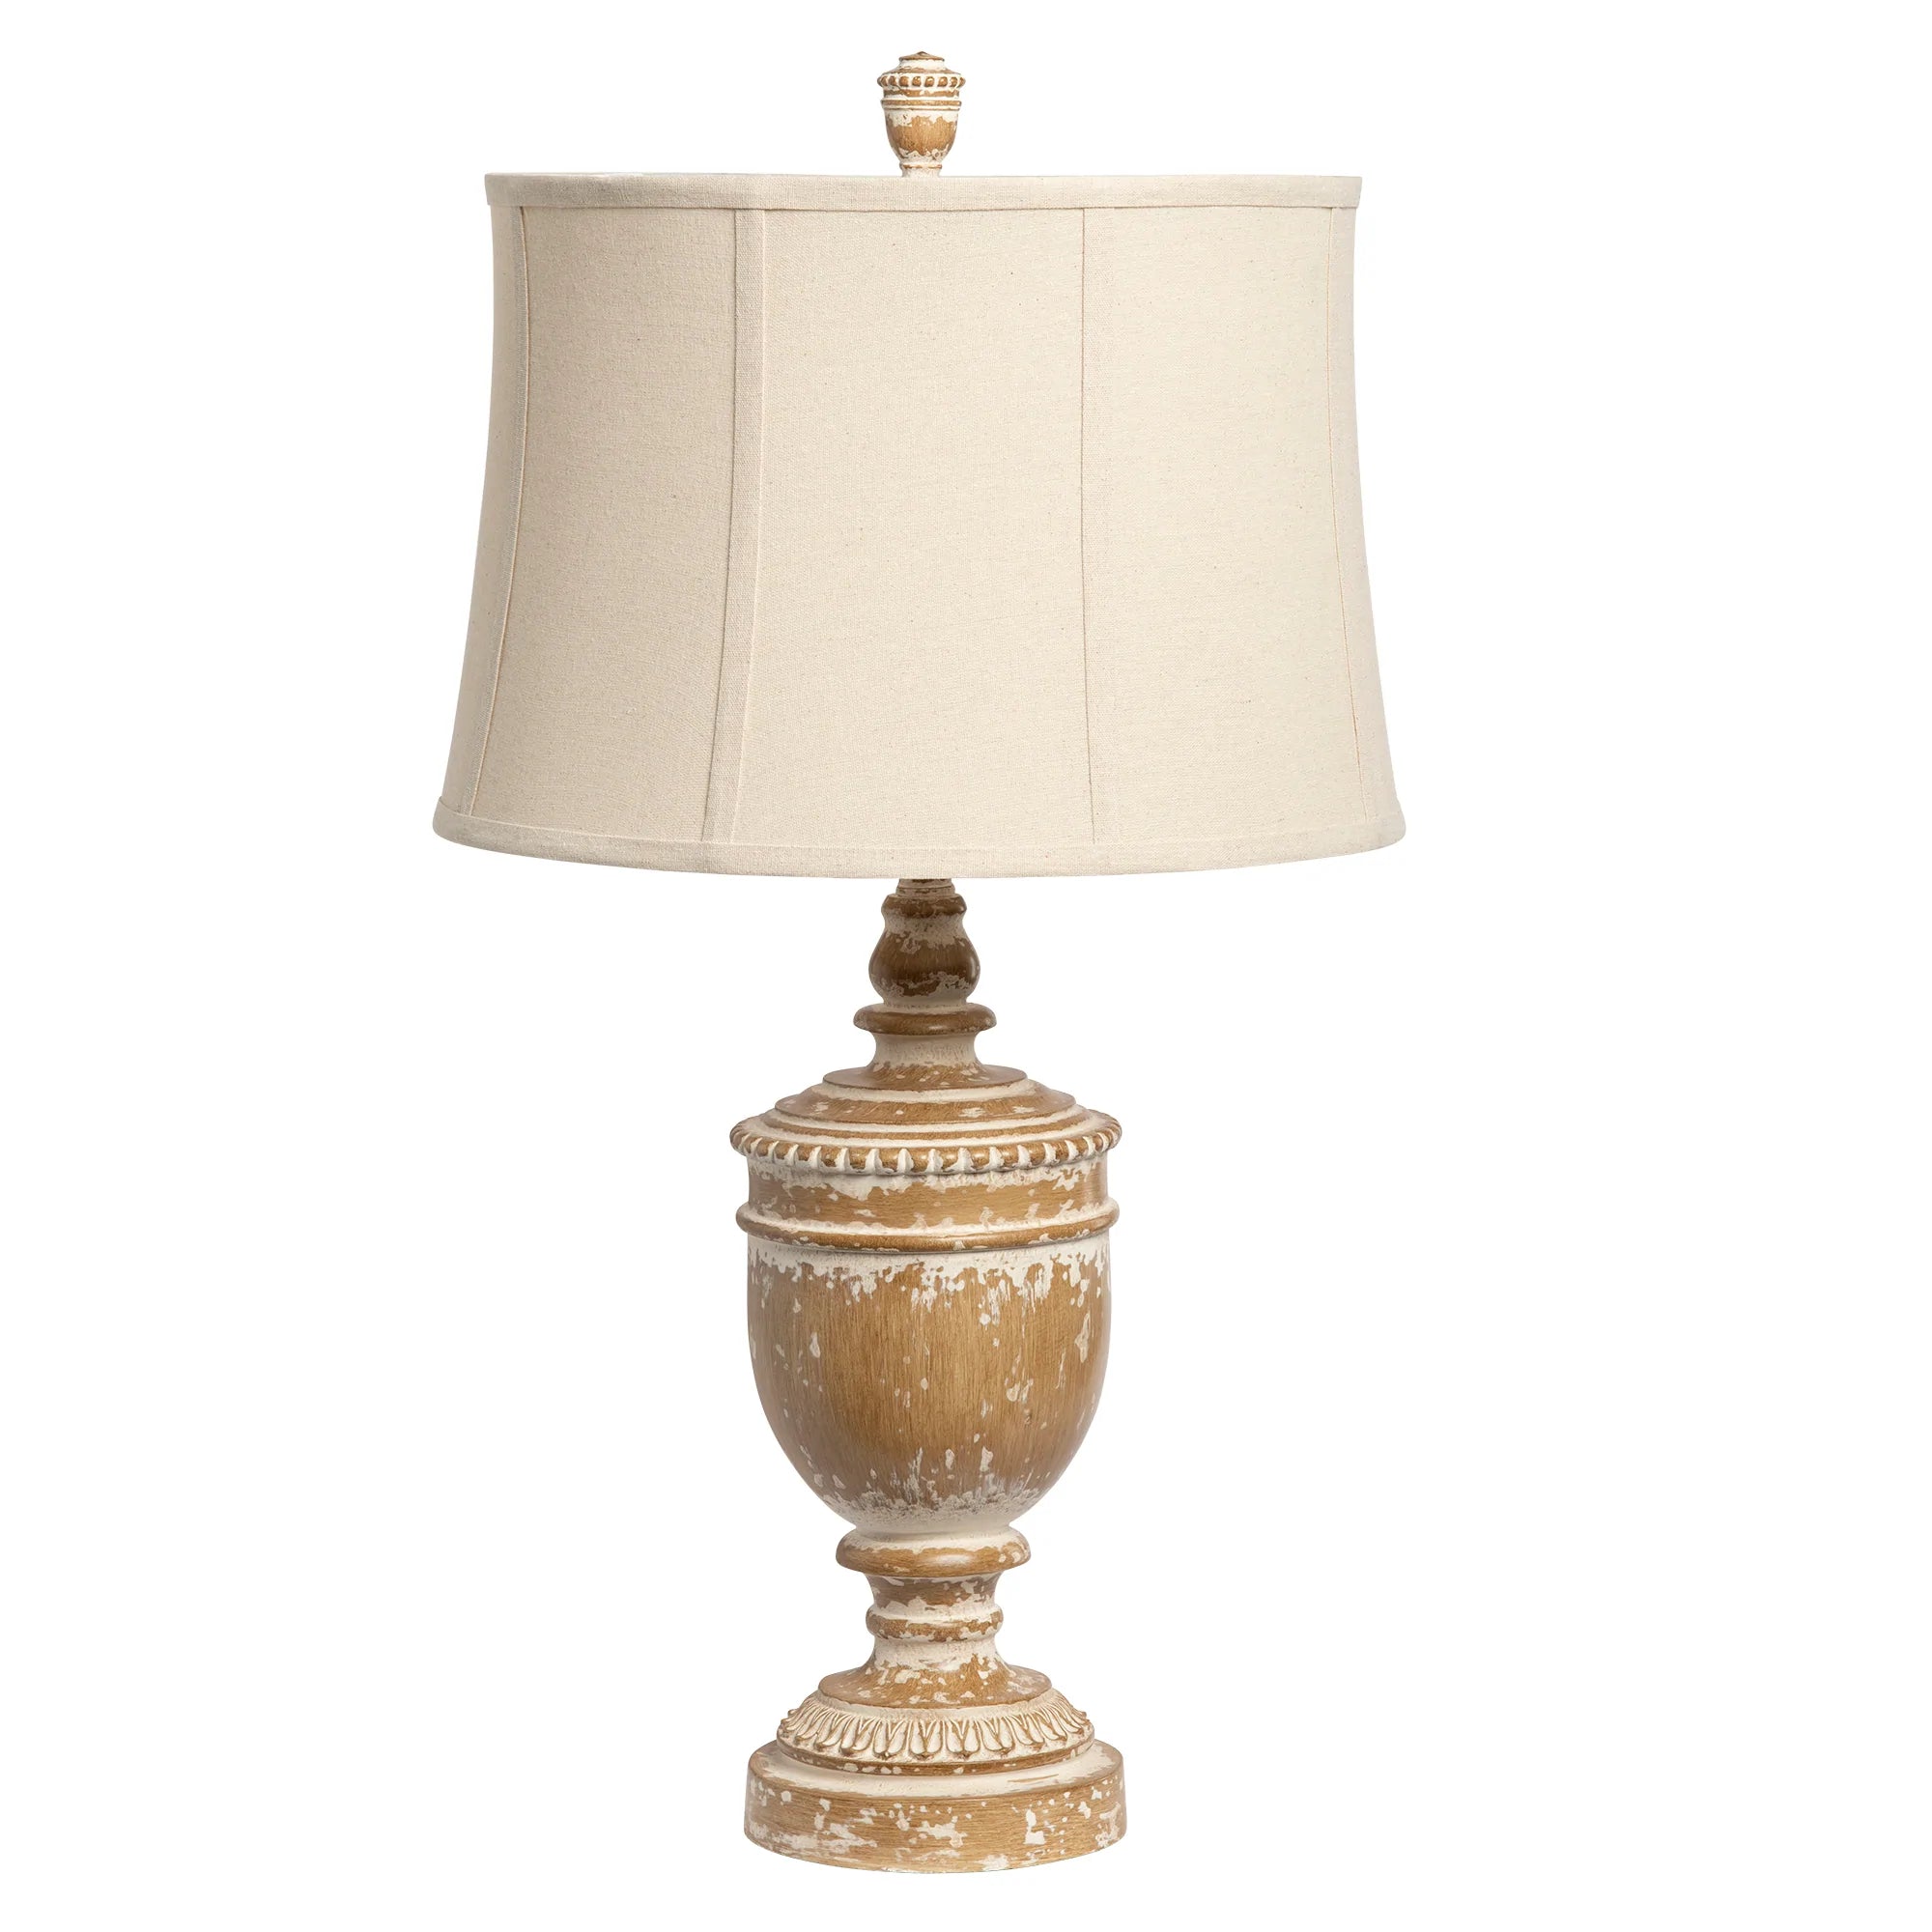 White Washed Finial Lamp